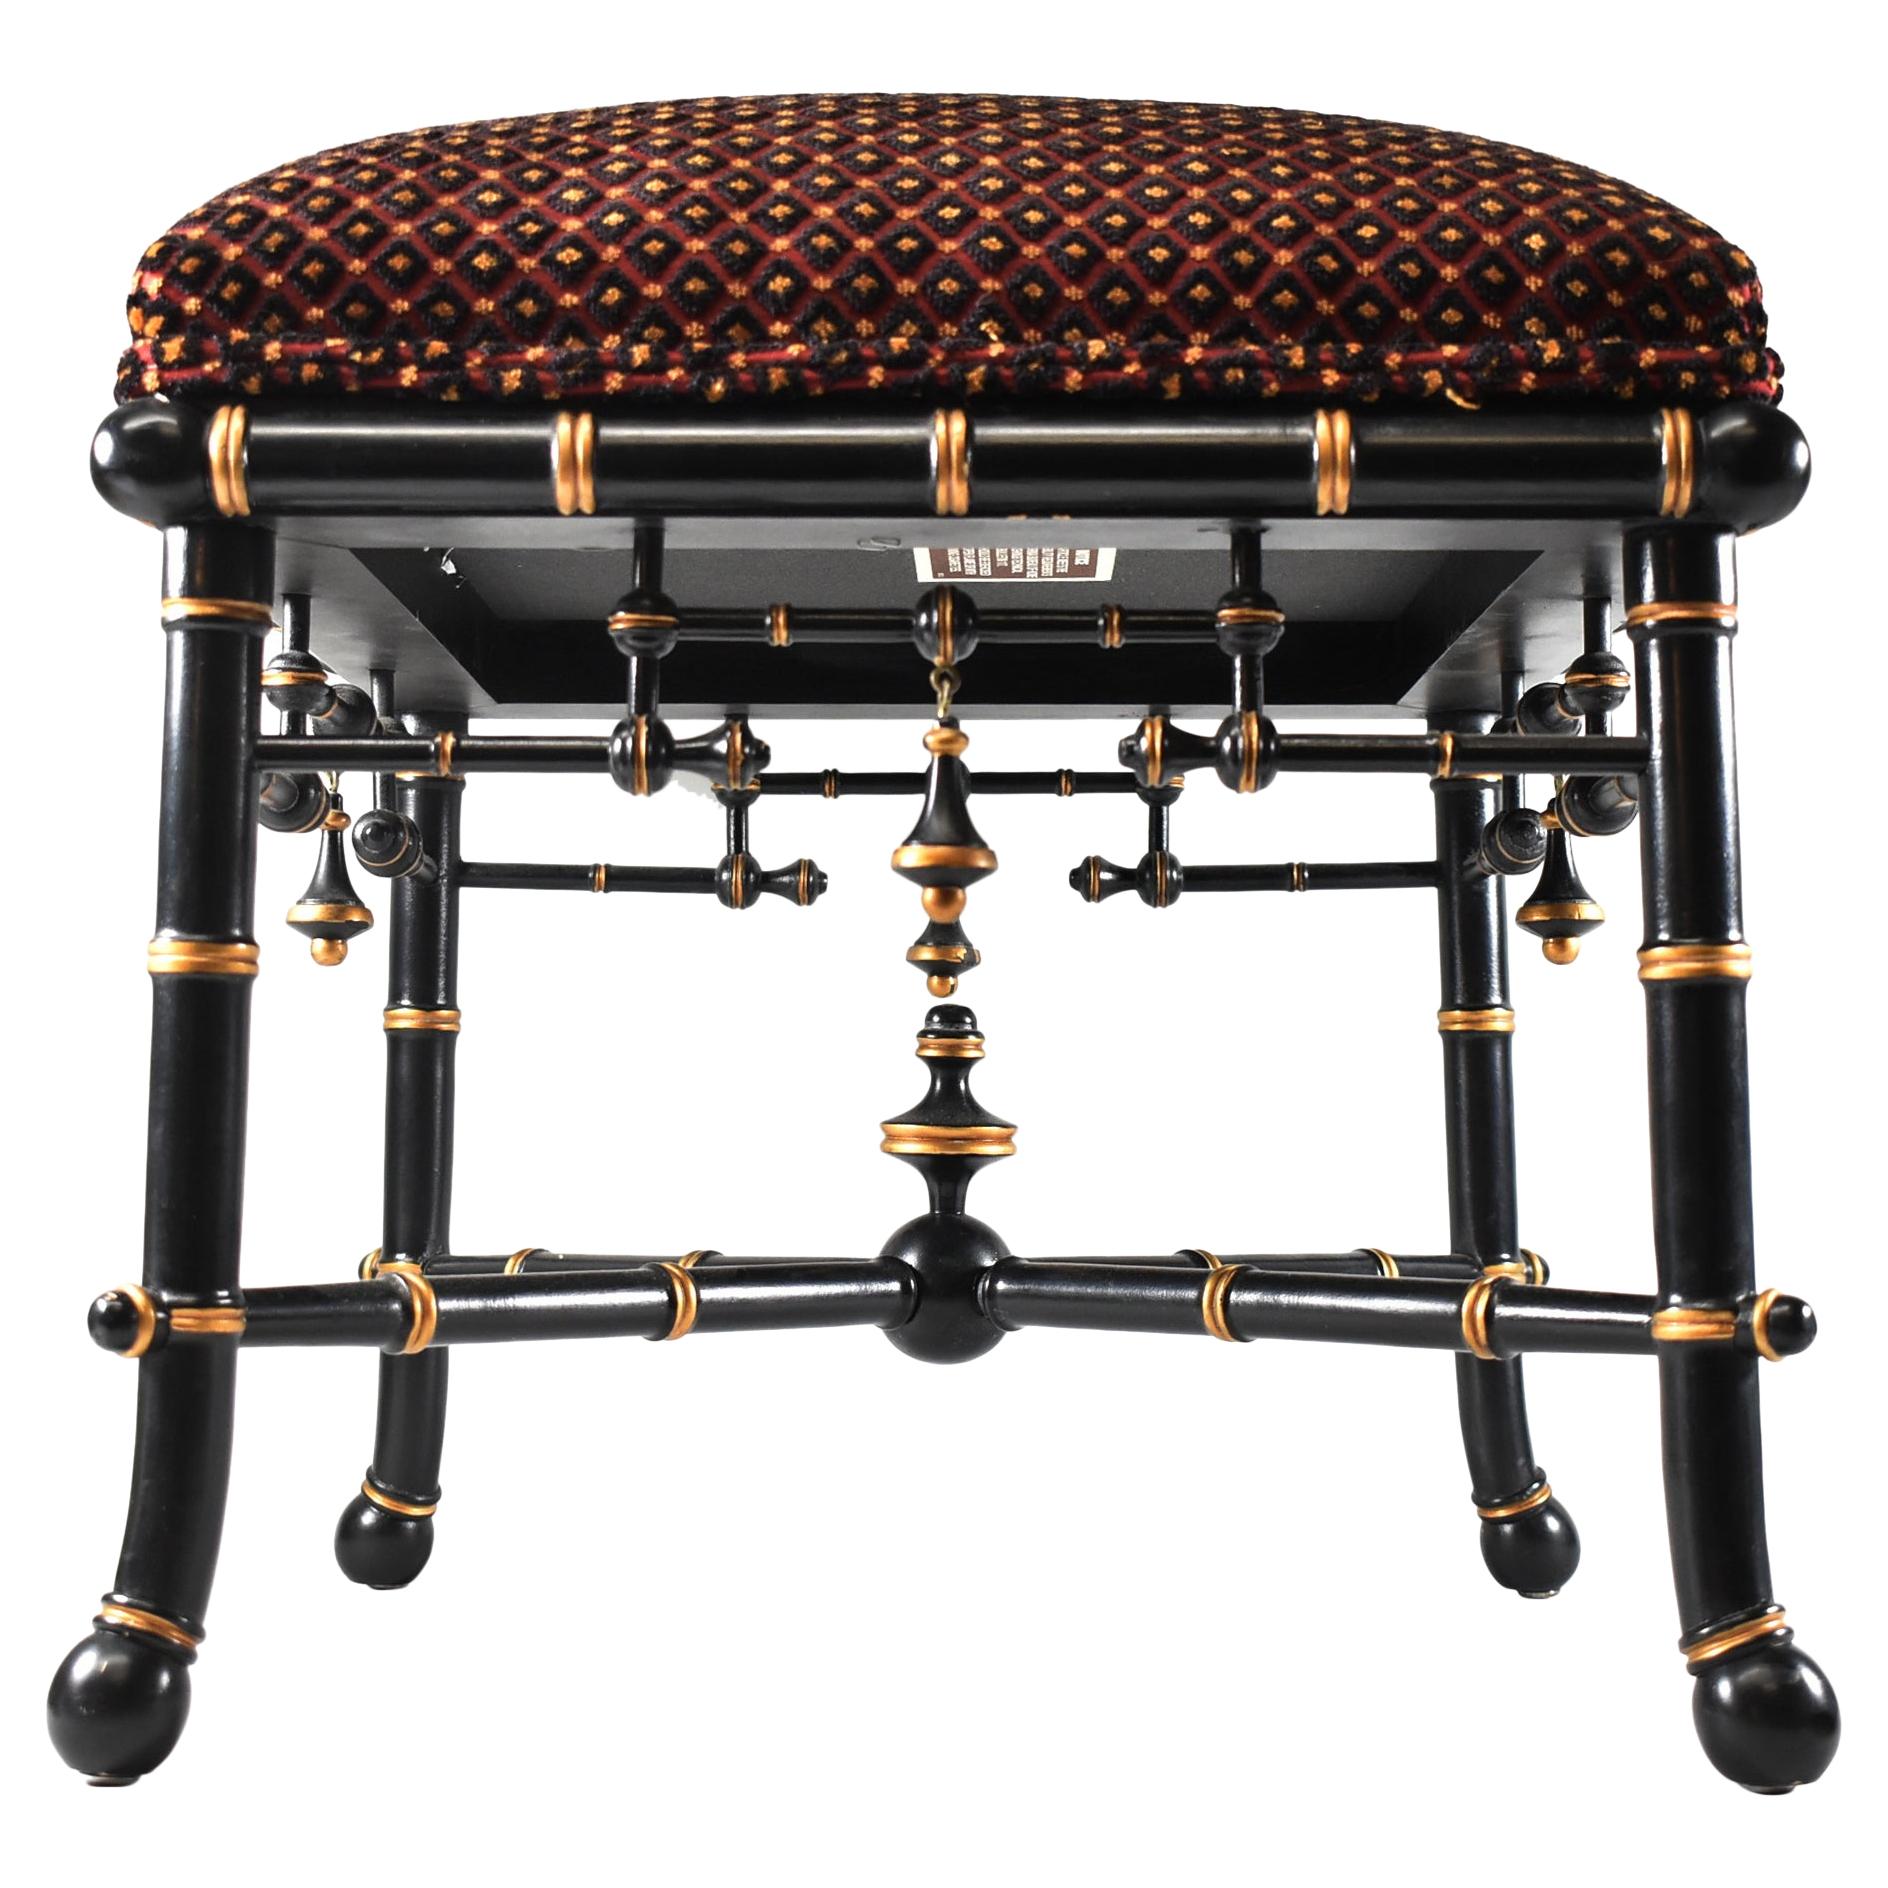 Baker furniture chinoiserie foot stool. Black lacquer bamboo look frame with gold highlights. Burgundy, black and gold patterned fabric. Measures: 16